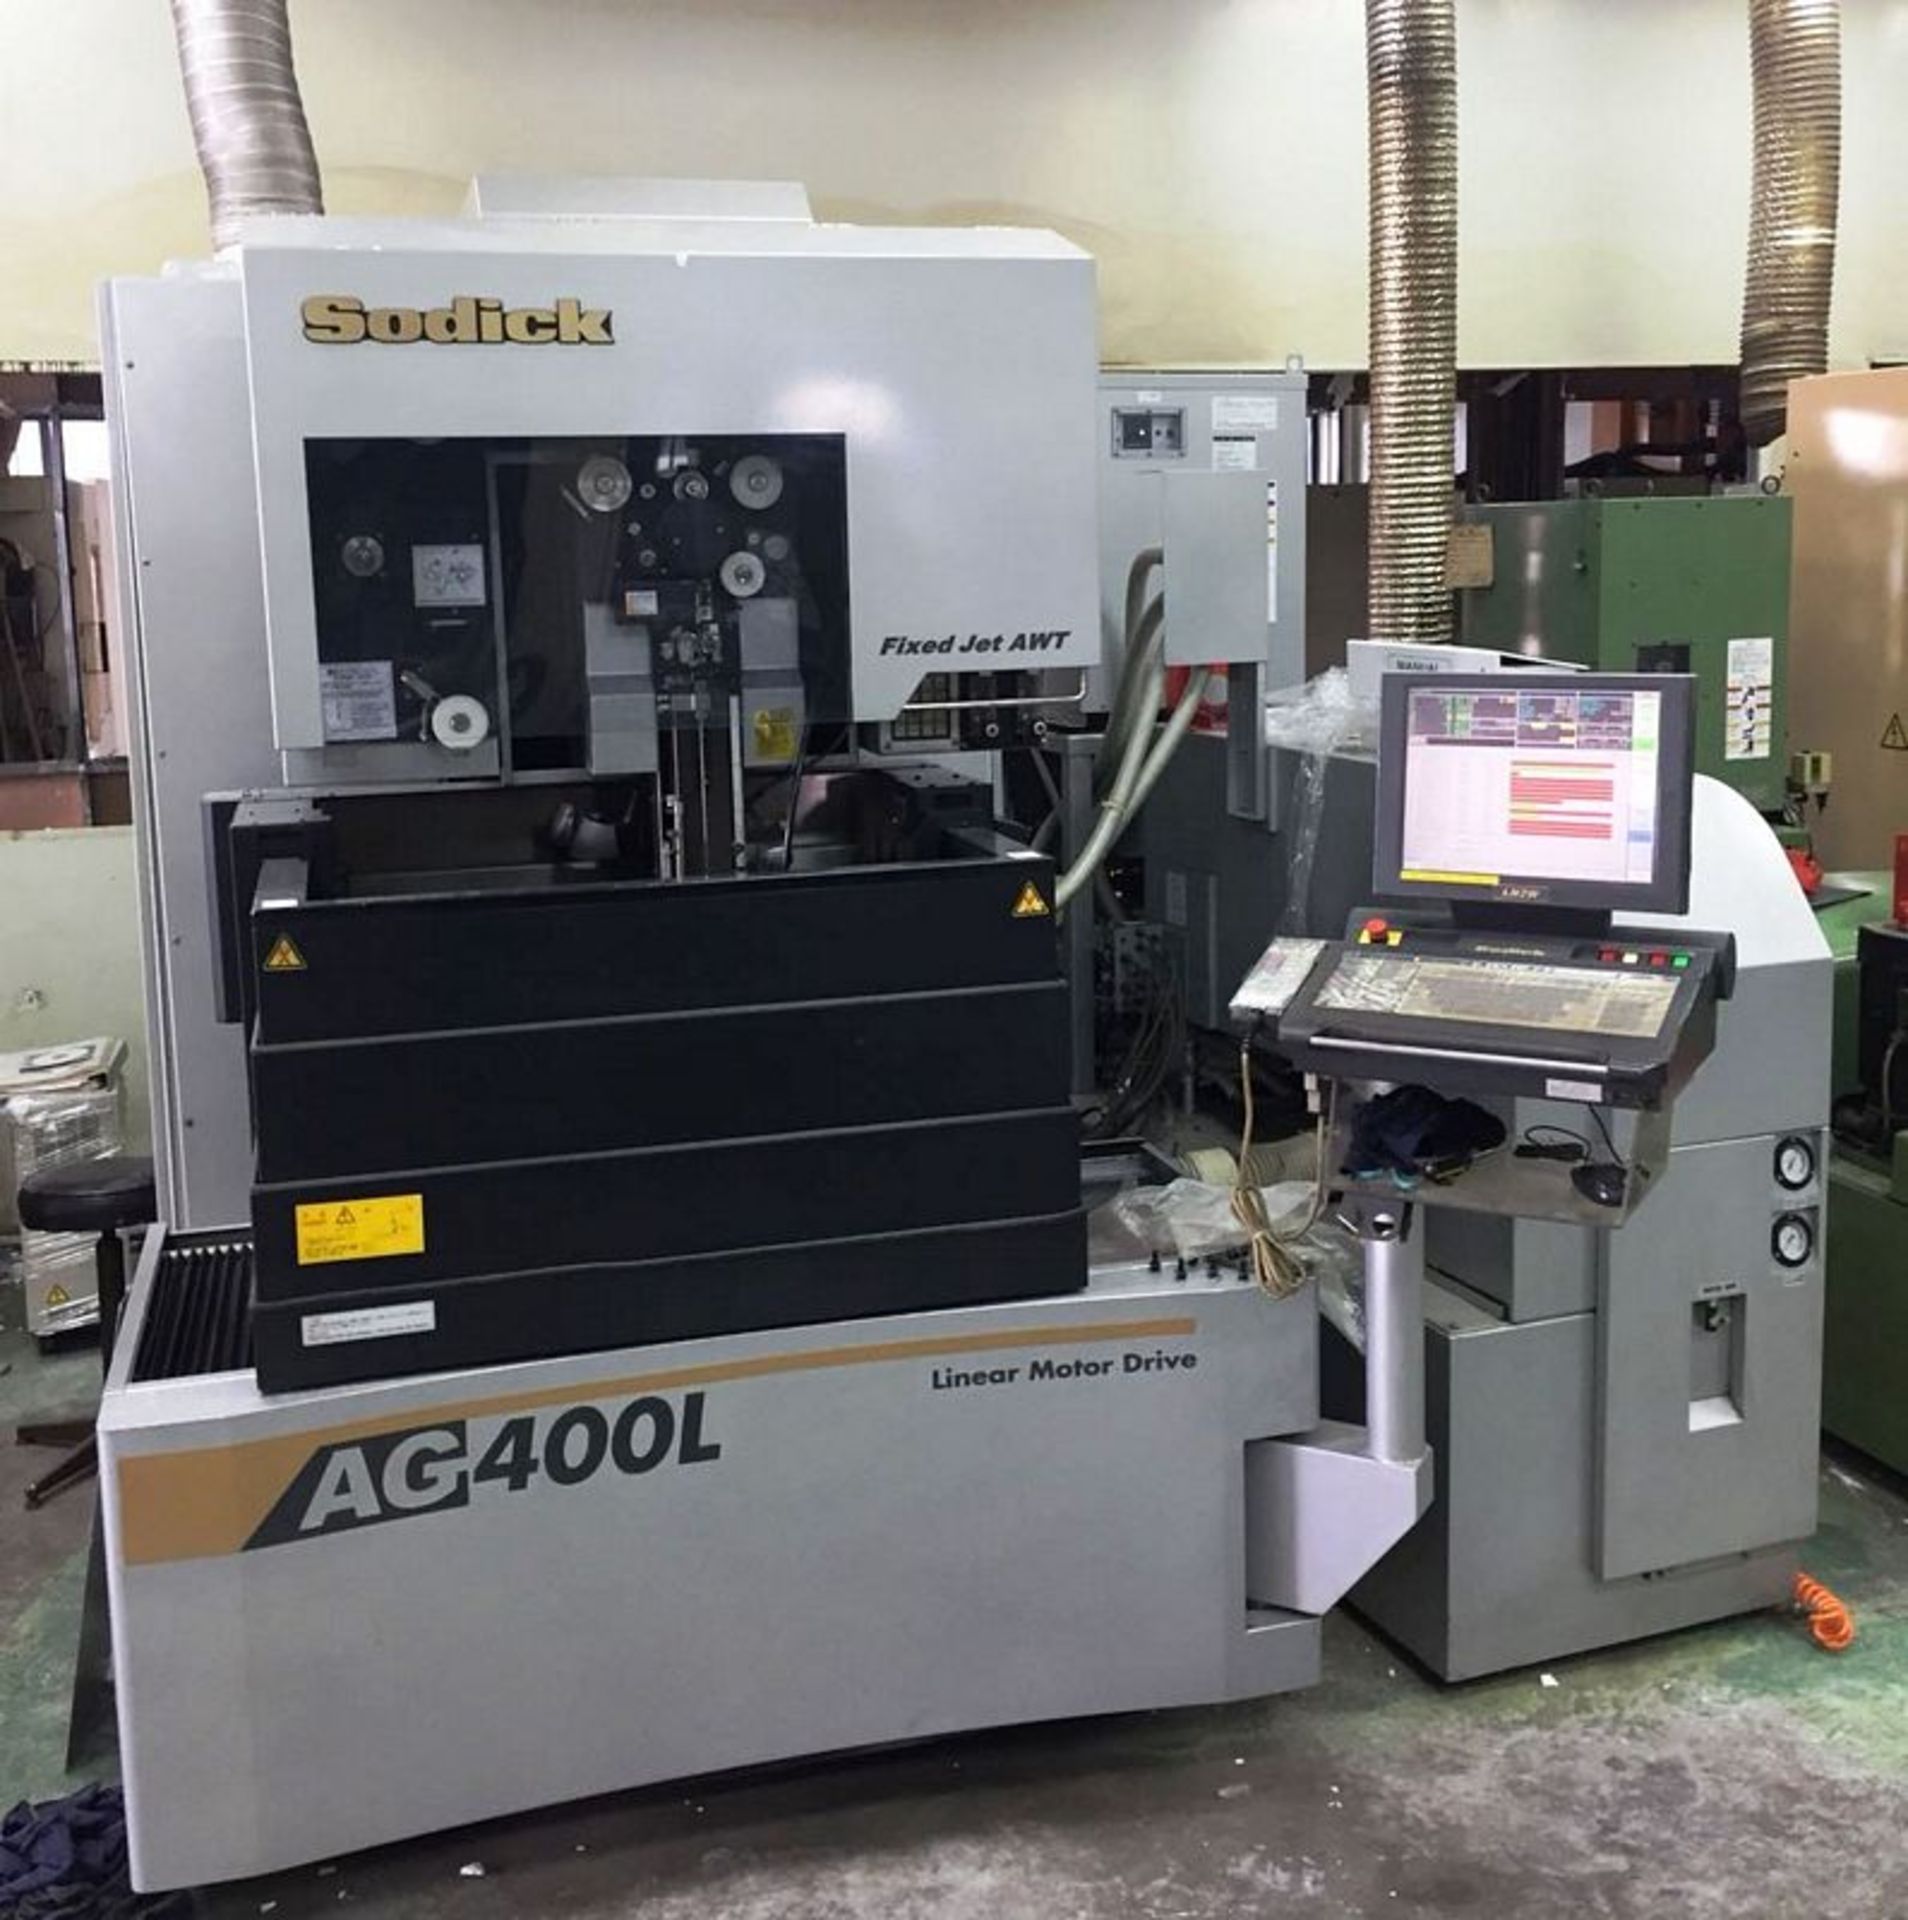 Sodick AG400L CNC 5-Axis Wire Cut EDM, S/N 1255, New 2013 Specifications, X Axis Travel 15.75", Y - Image 7 of 8